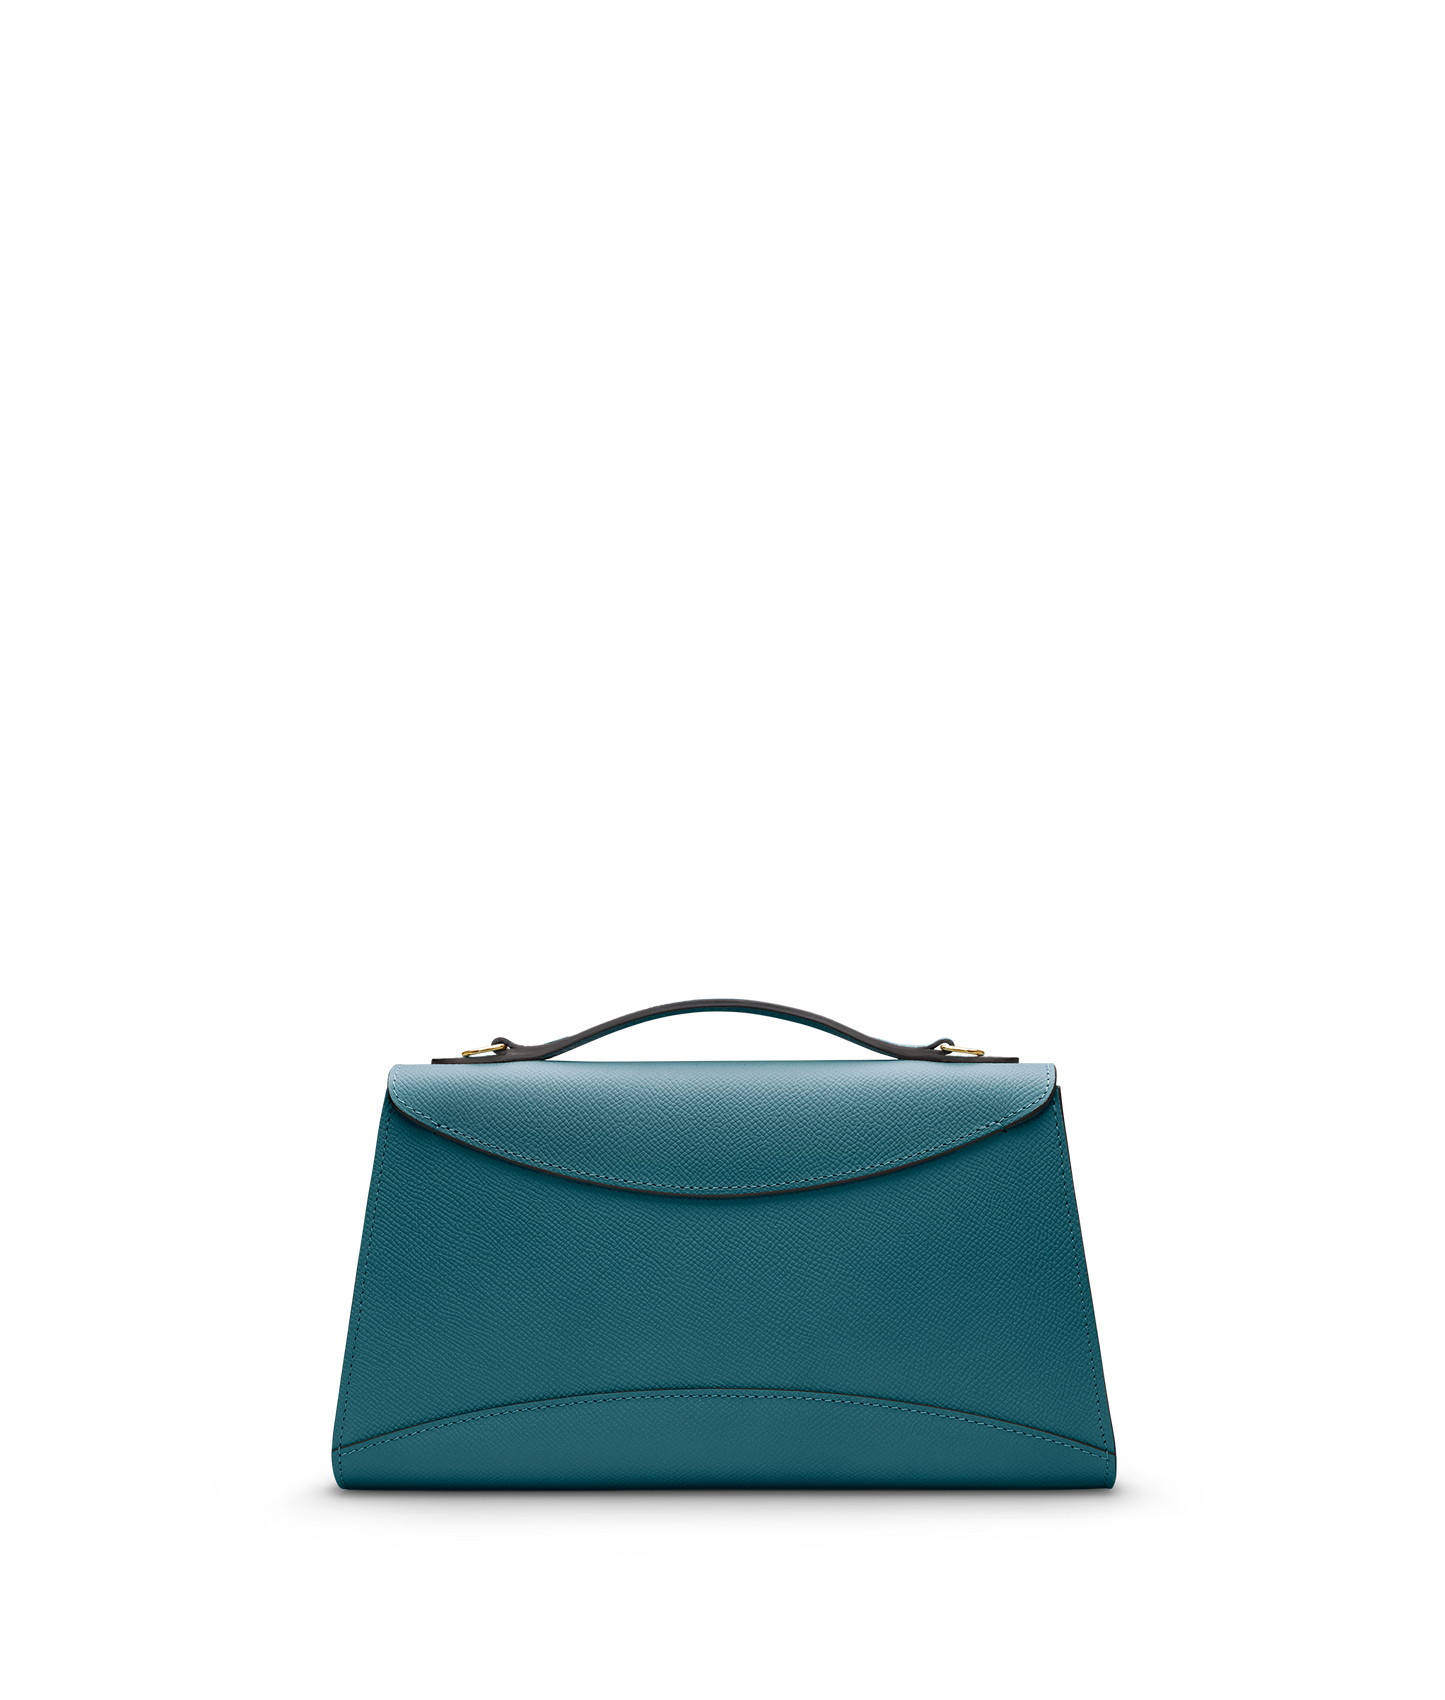 MOYNAT on X: A closer look at the Gabrielle. #moynat